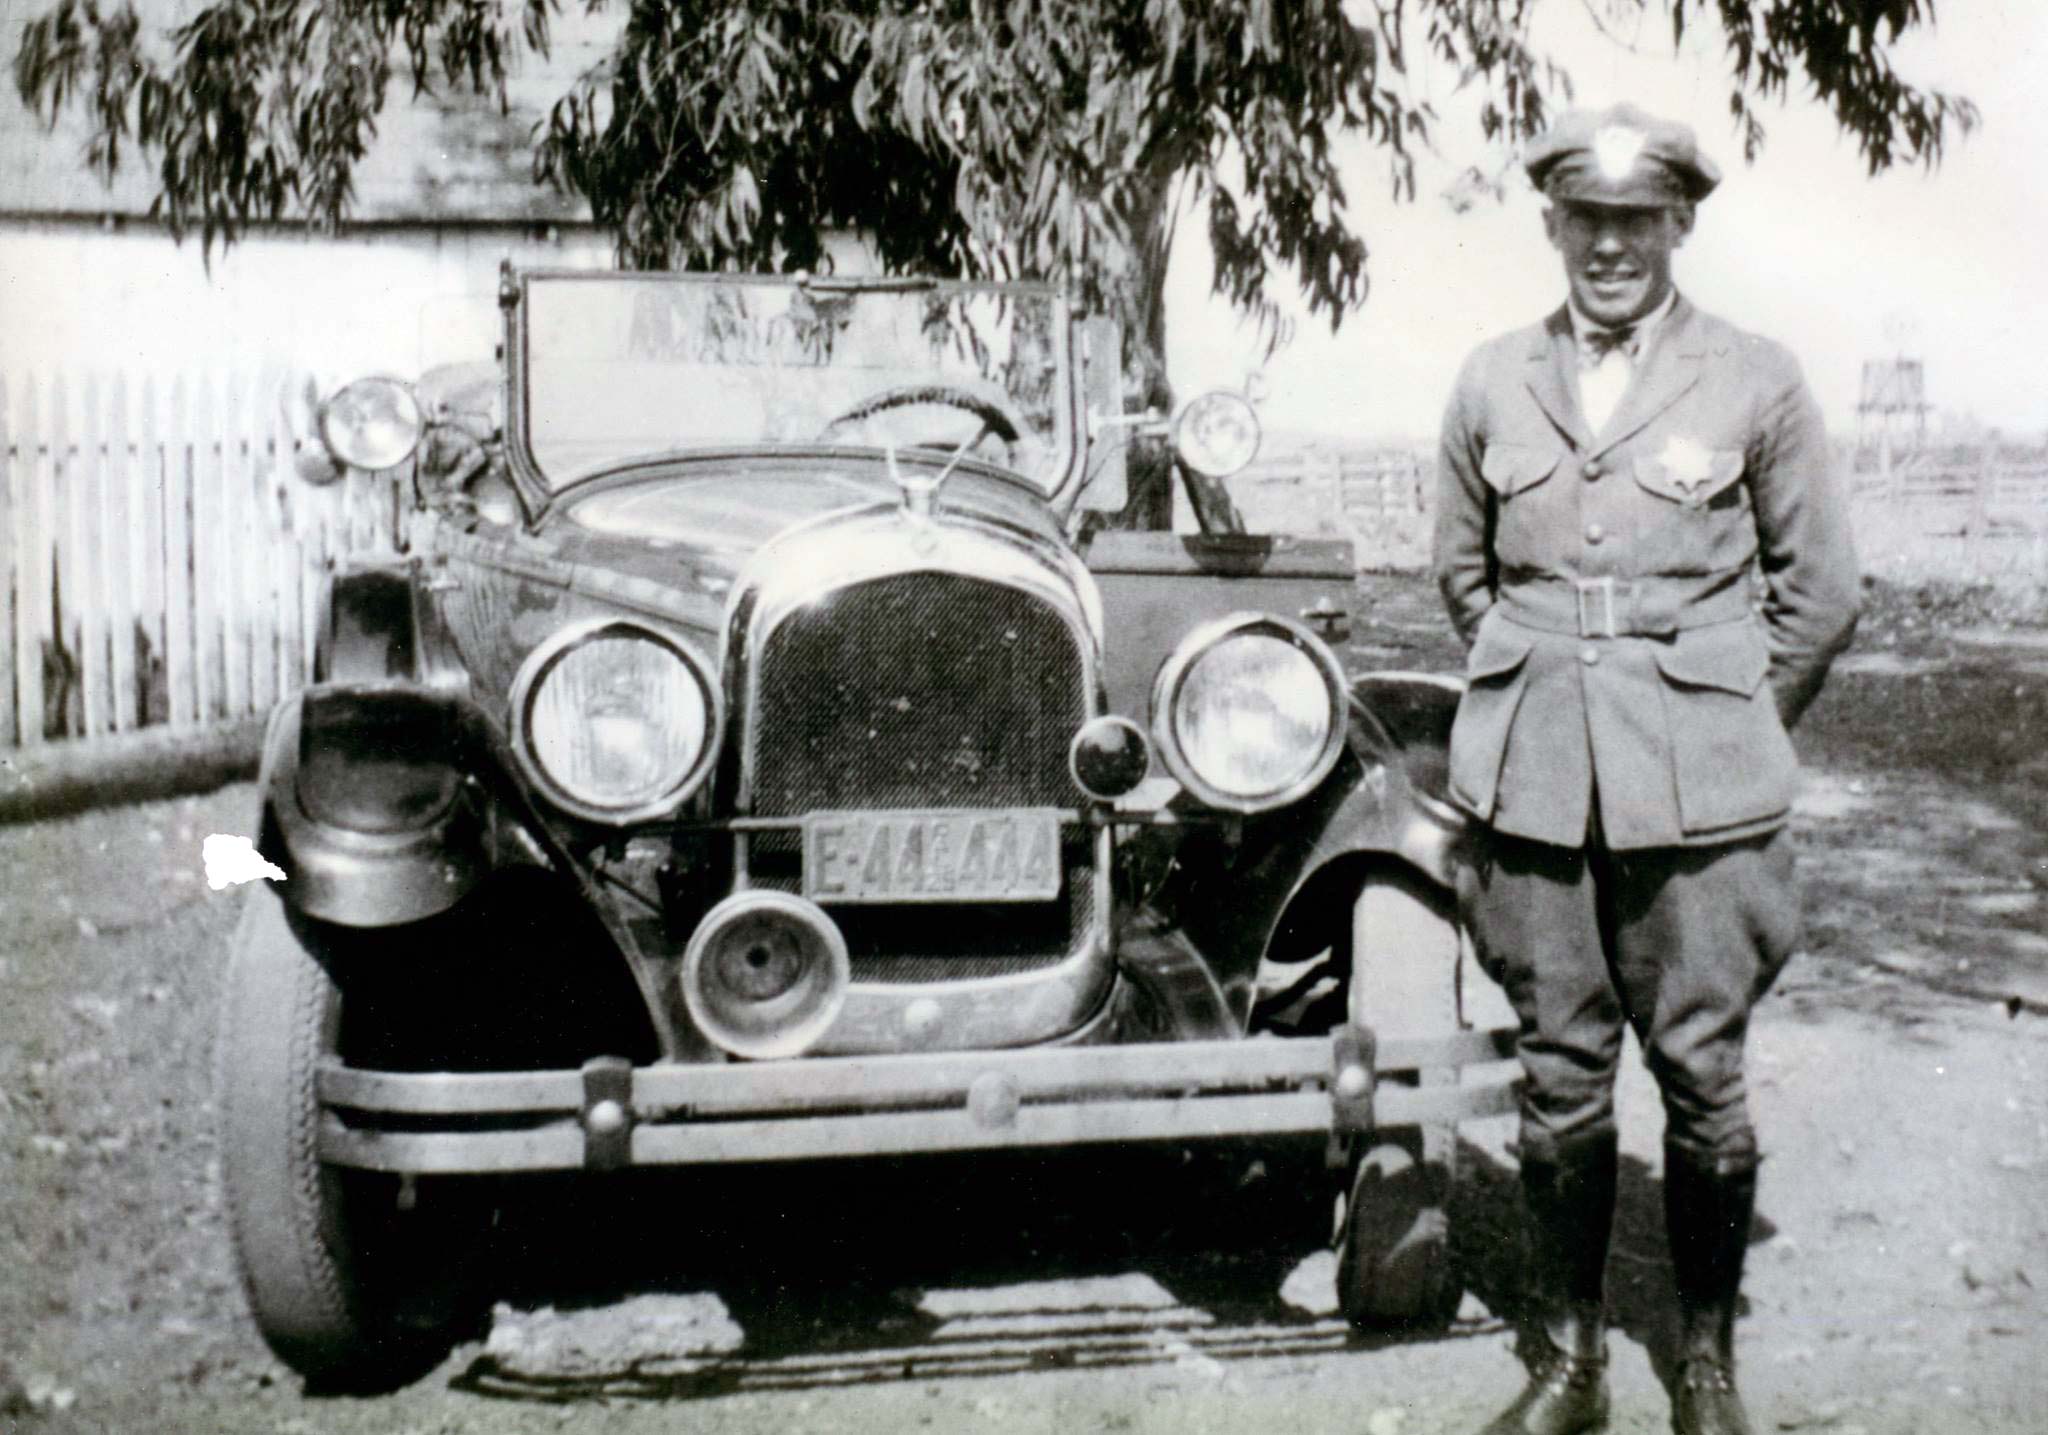 1925 police car and officer